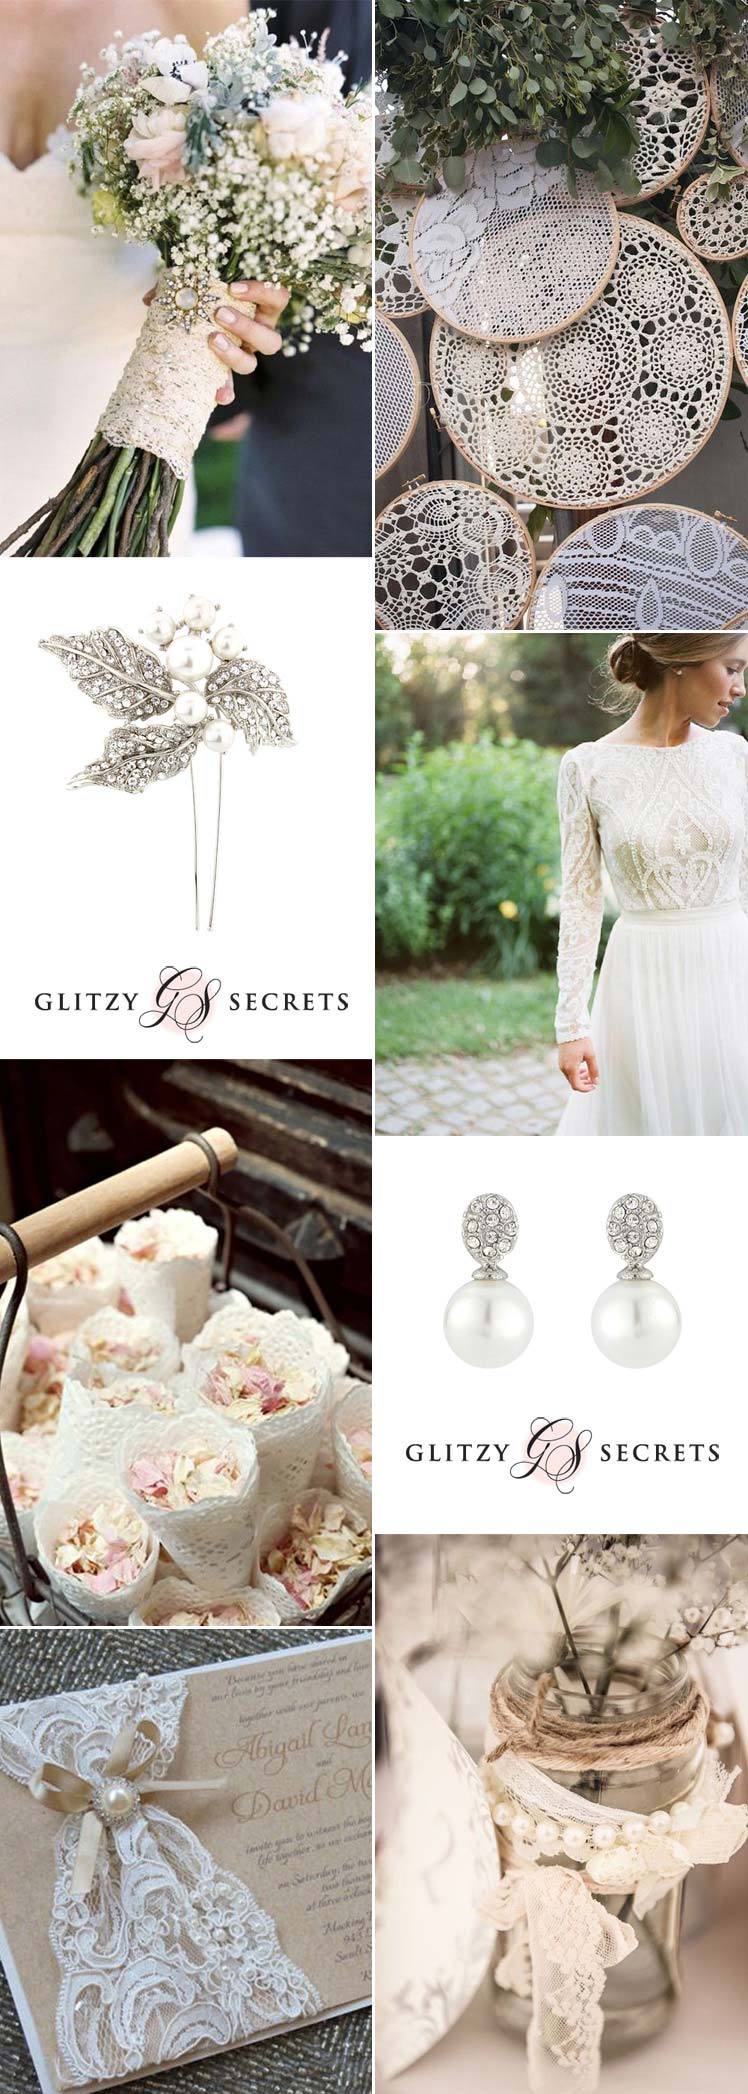 Lace and pearl wedding ideas